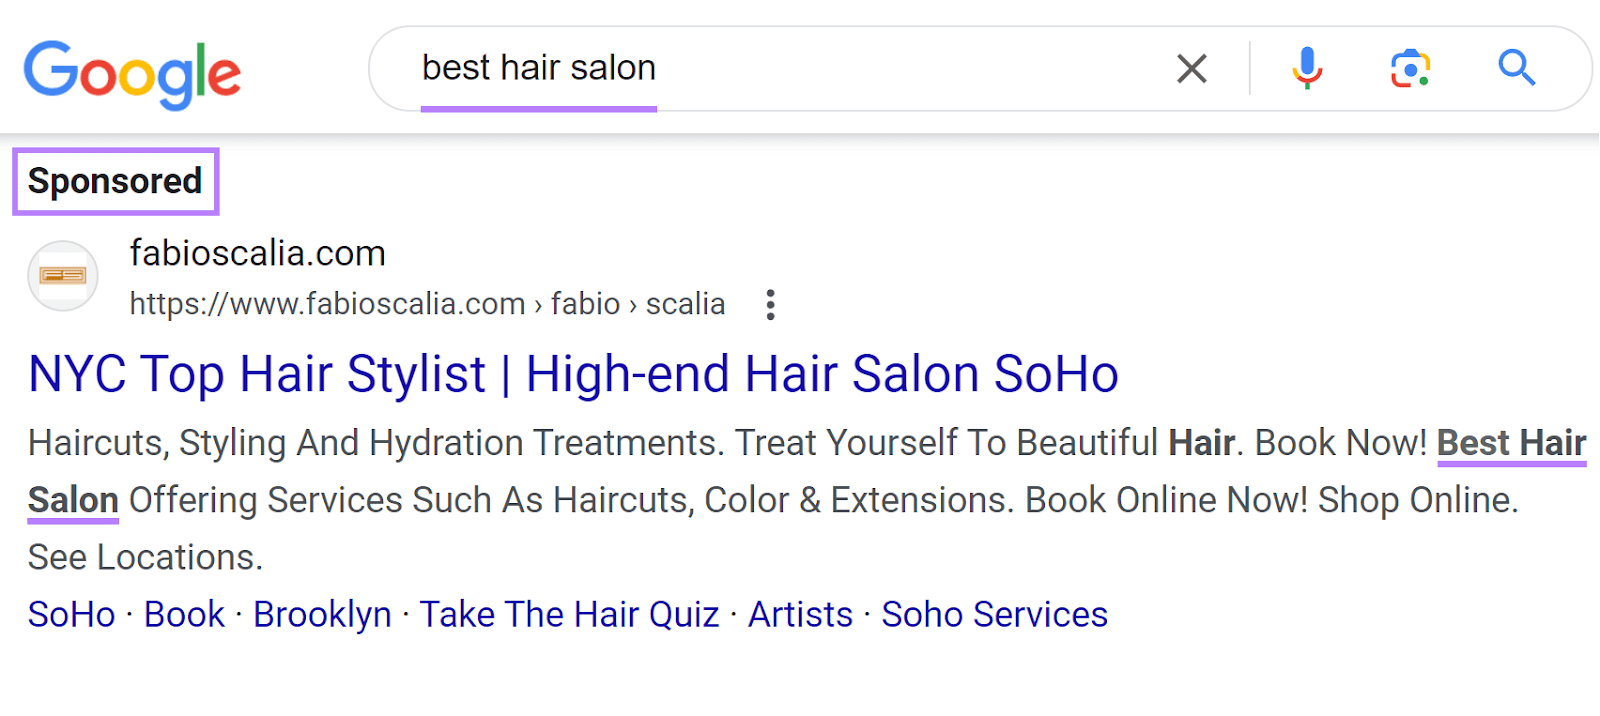 "Sponsored" results connected  Google SERP for a champion  hairsbreadth  salon